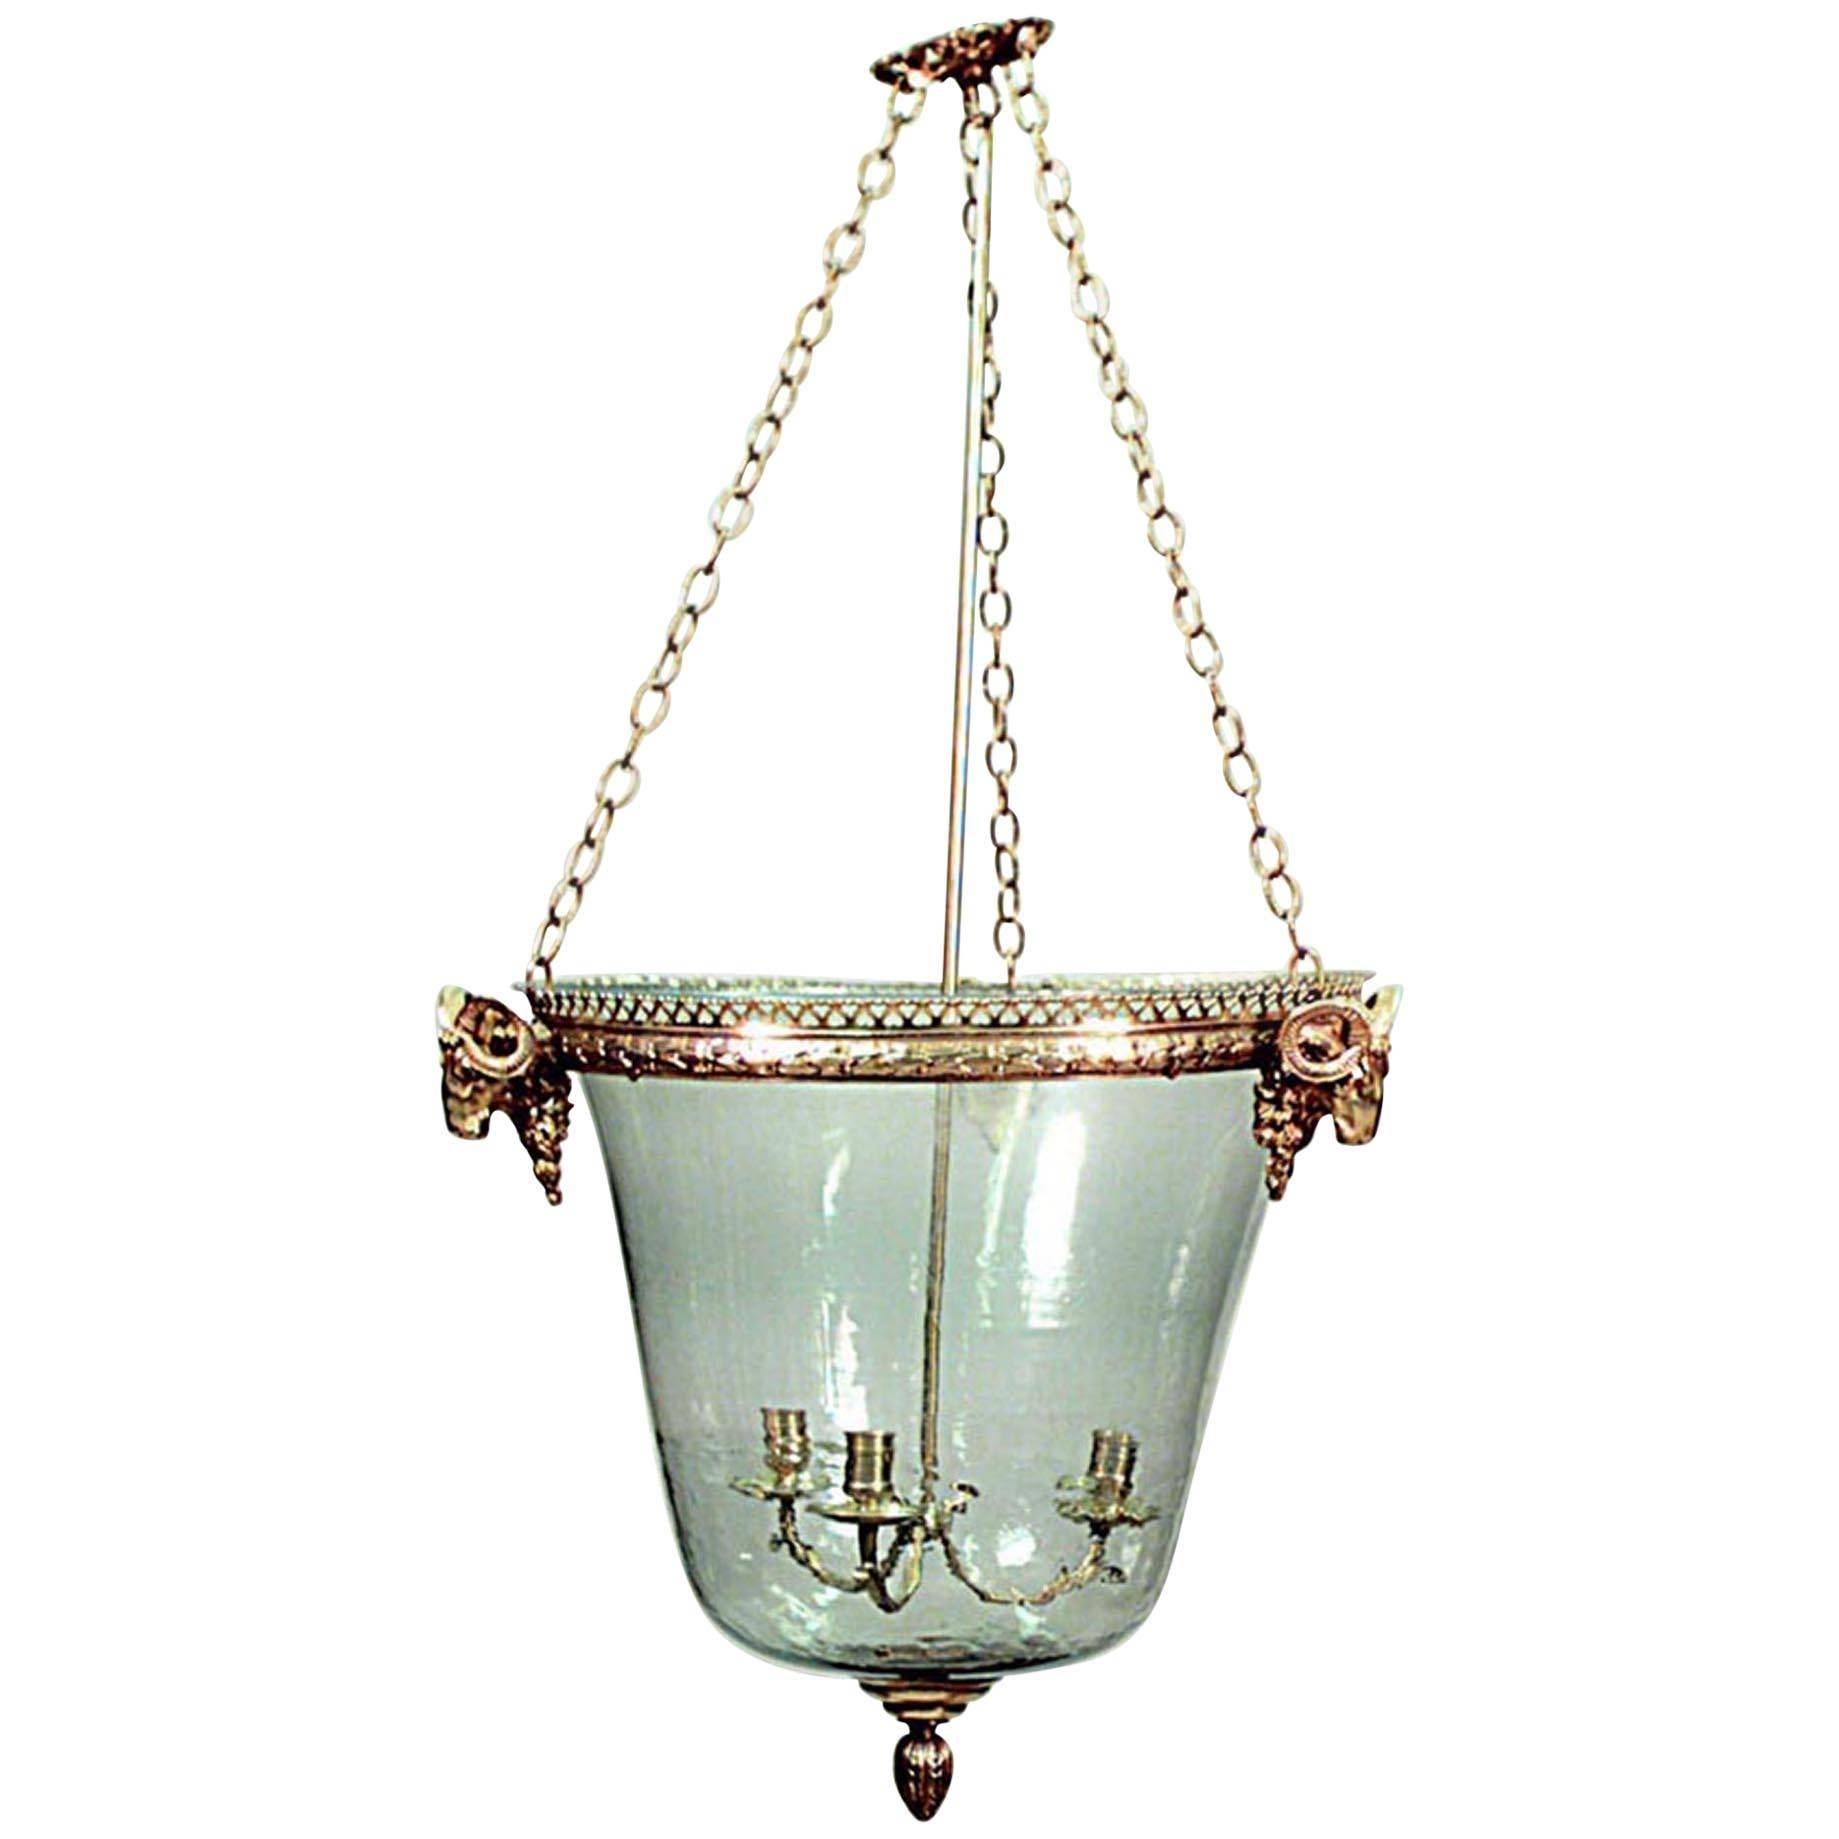 French Louis XVI Style Bronze Dore and Glass Hanging Lantern